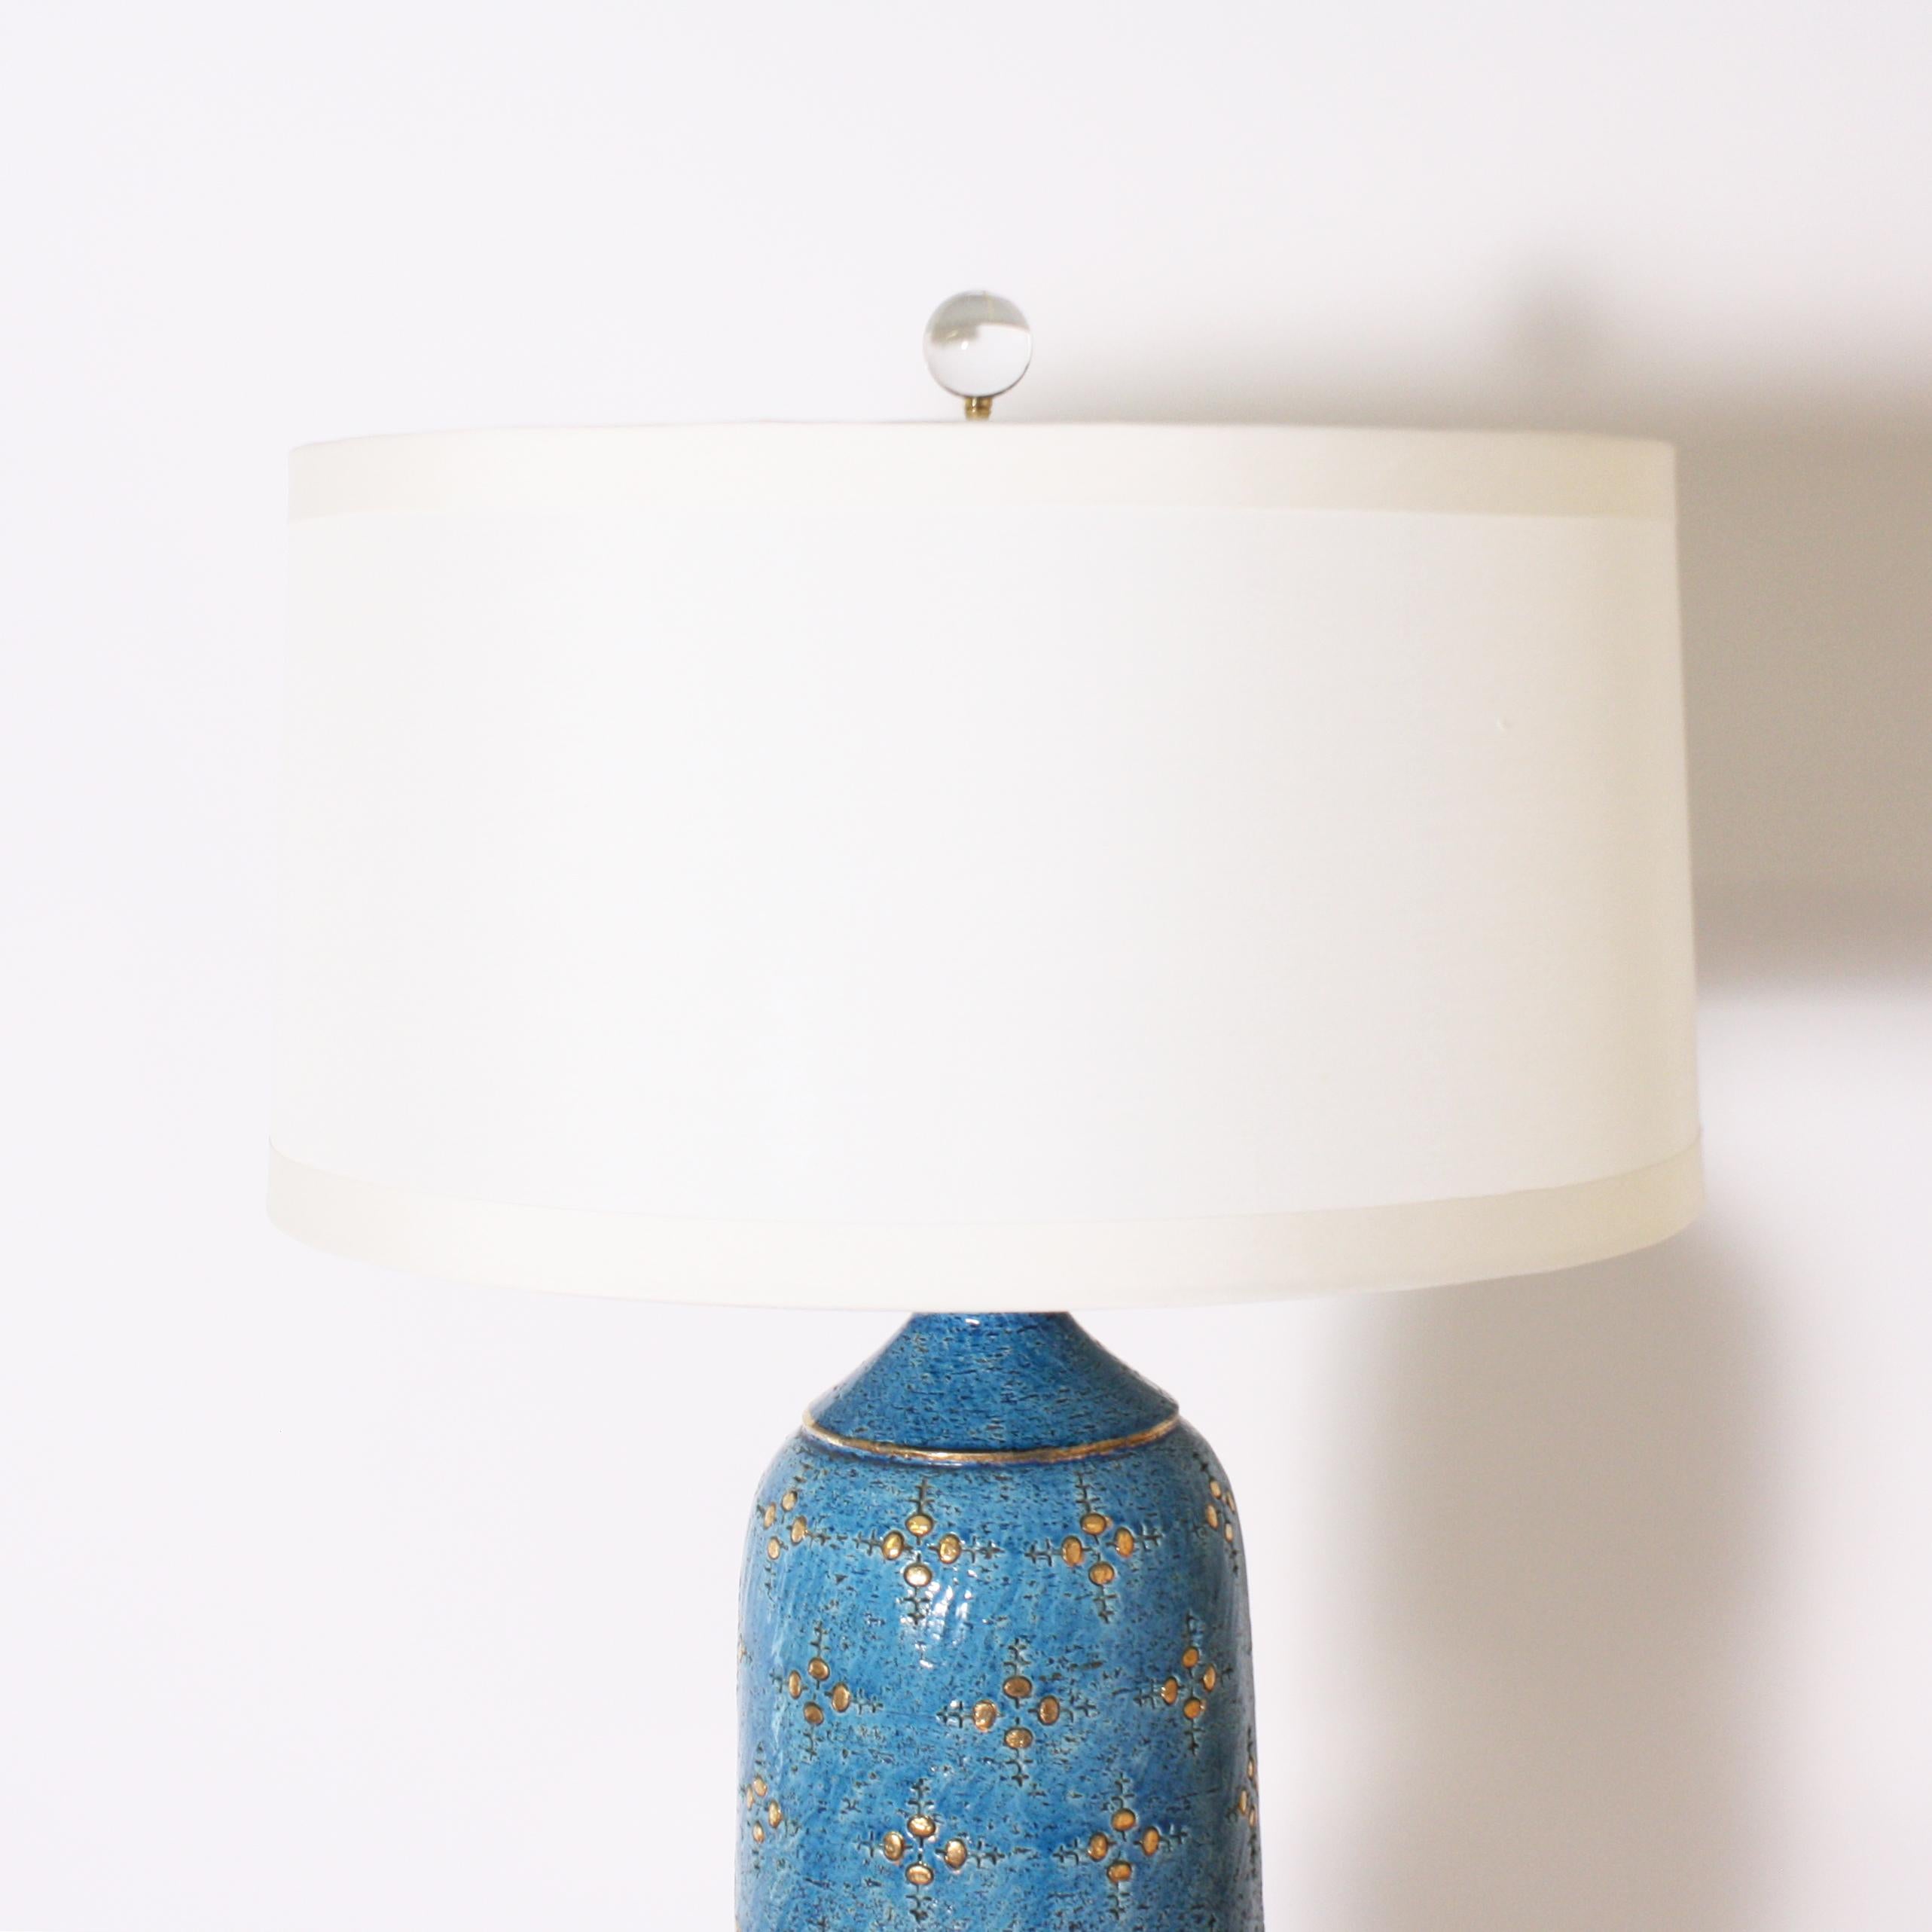 Blue Marbro ceramic lamp, circa 1960

Off-white pongee shade, crystal ball finial, Lucite base with gold twisted cording.